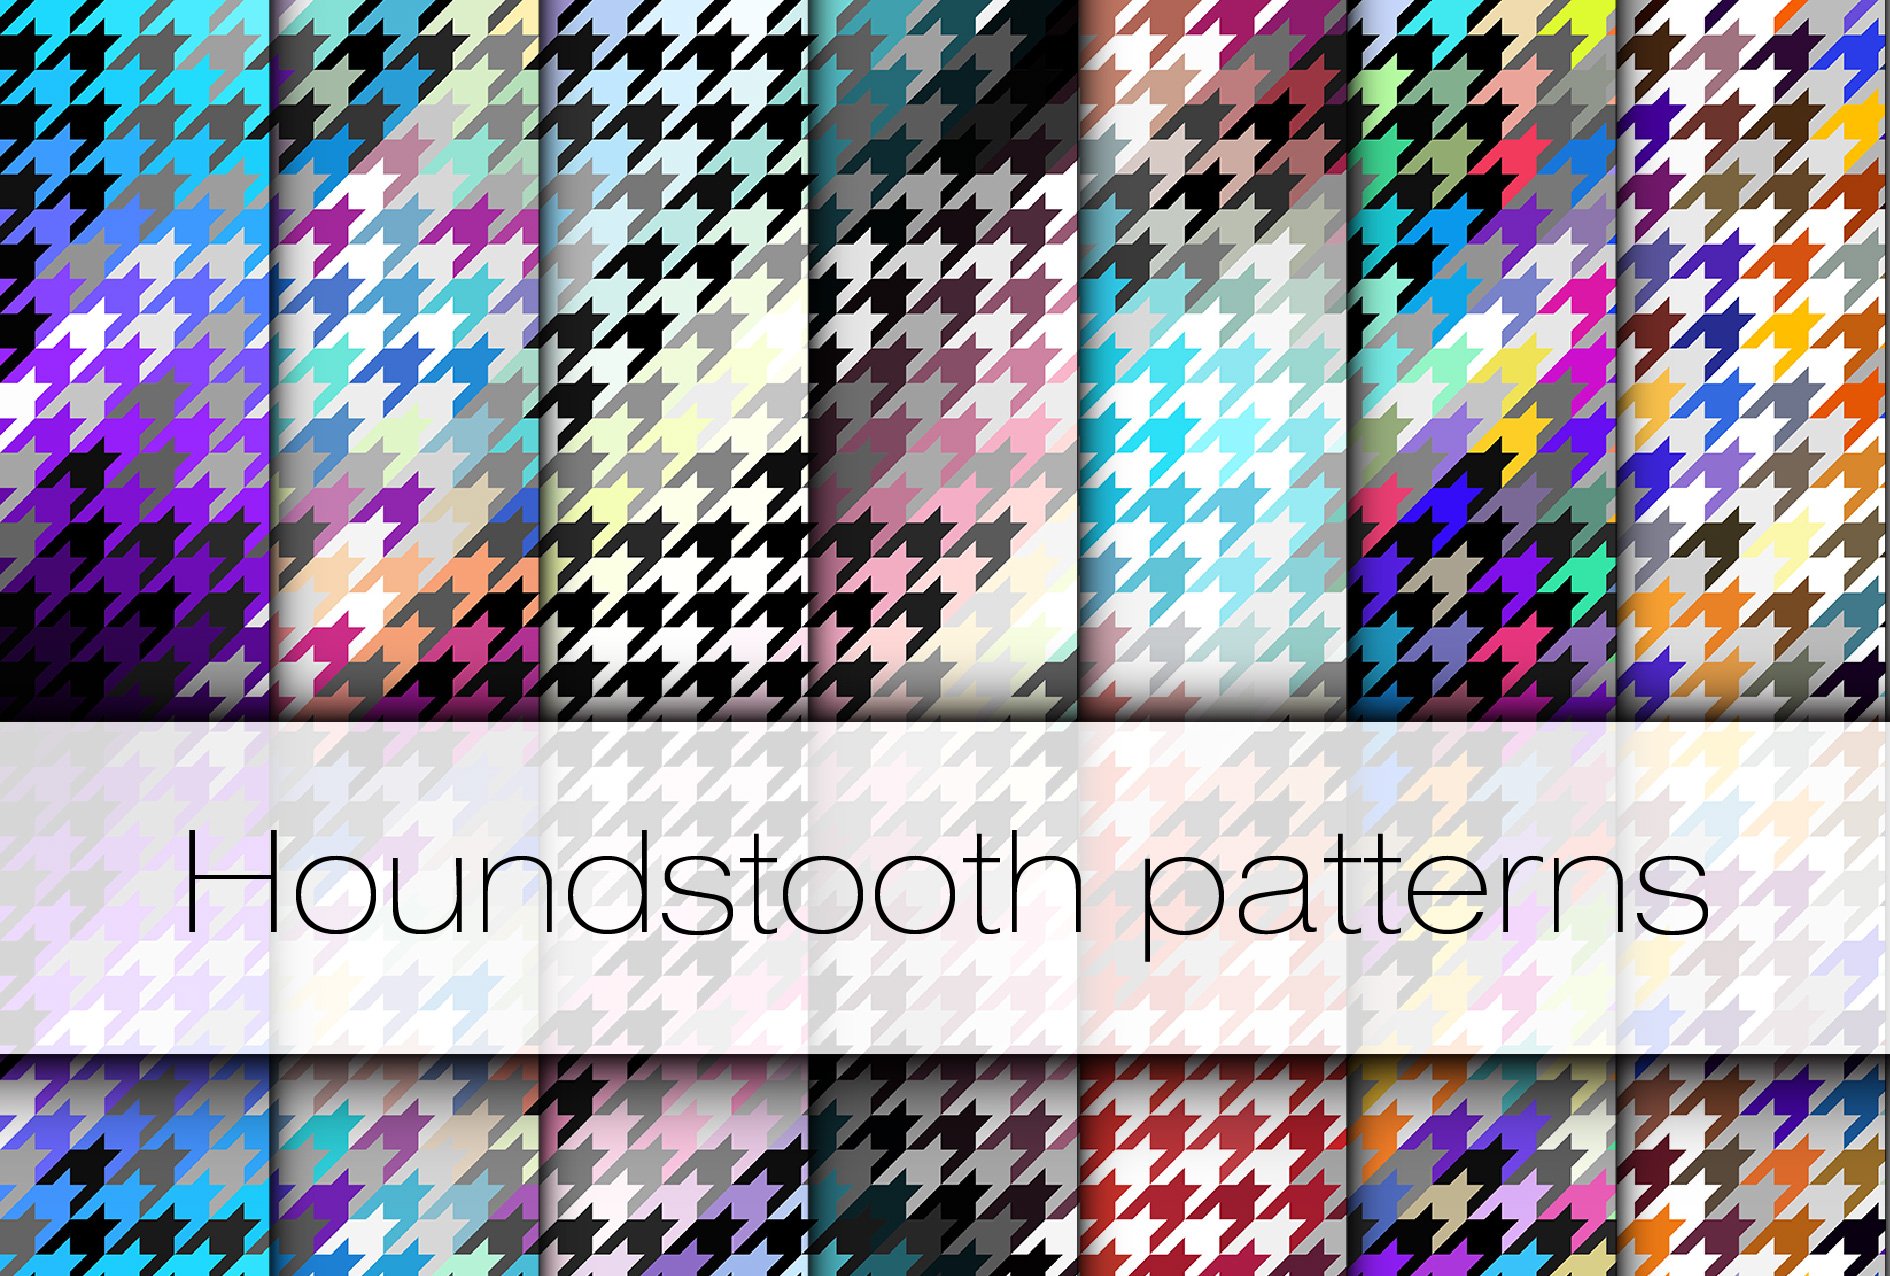 10 houndstooth patterns cover image.